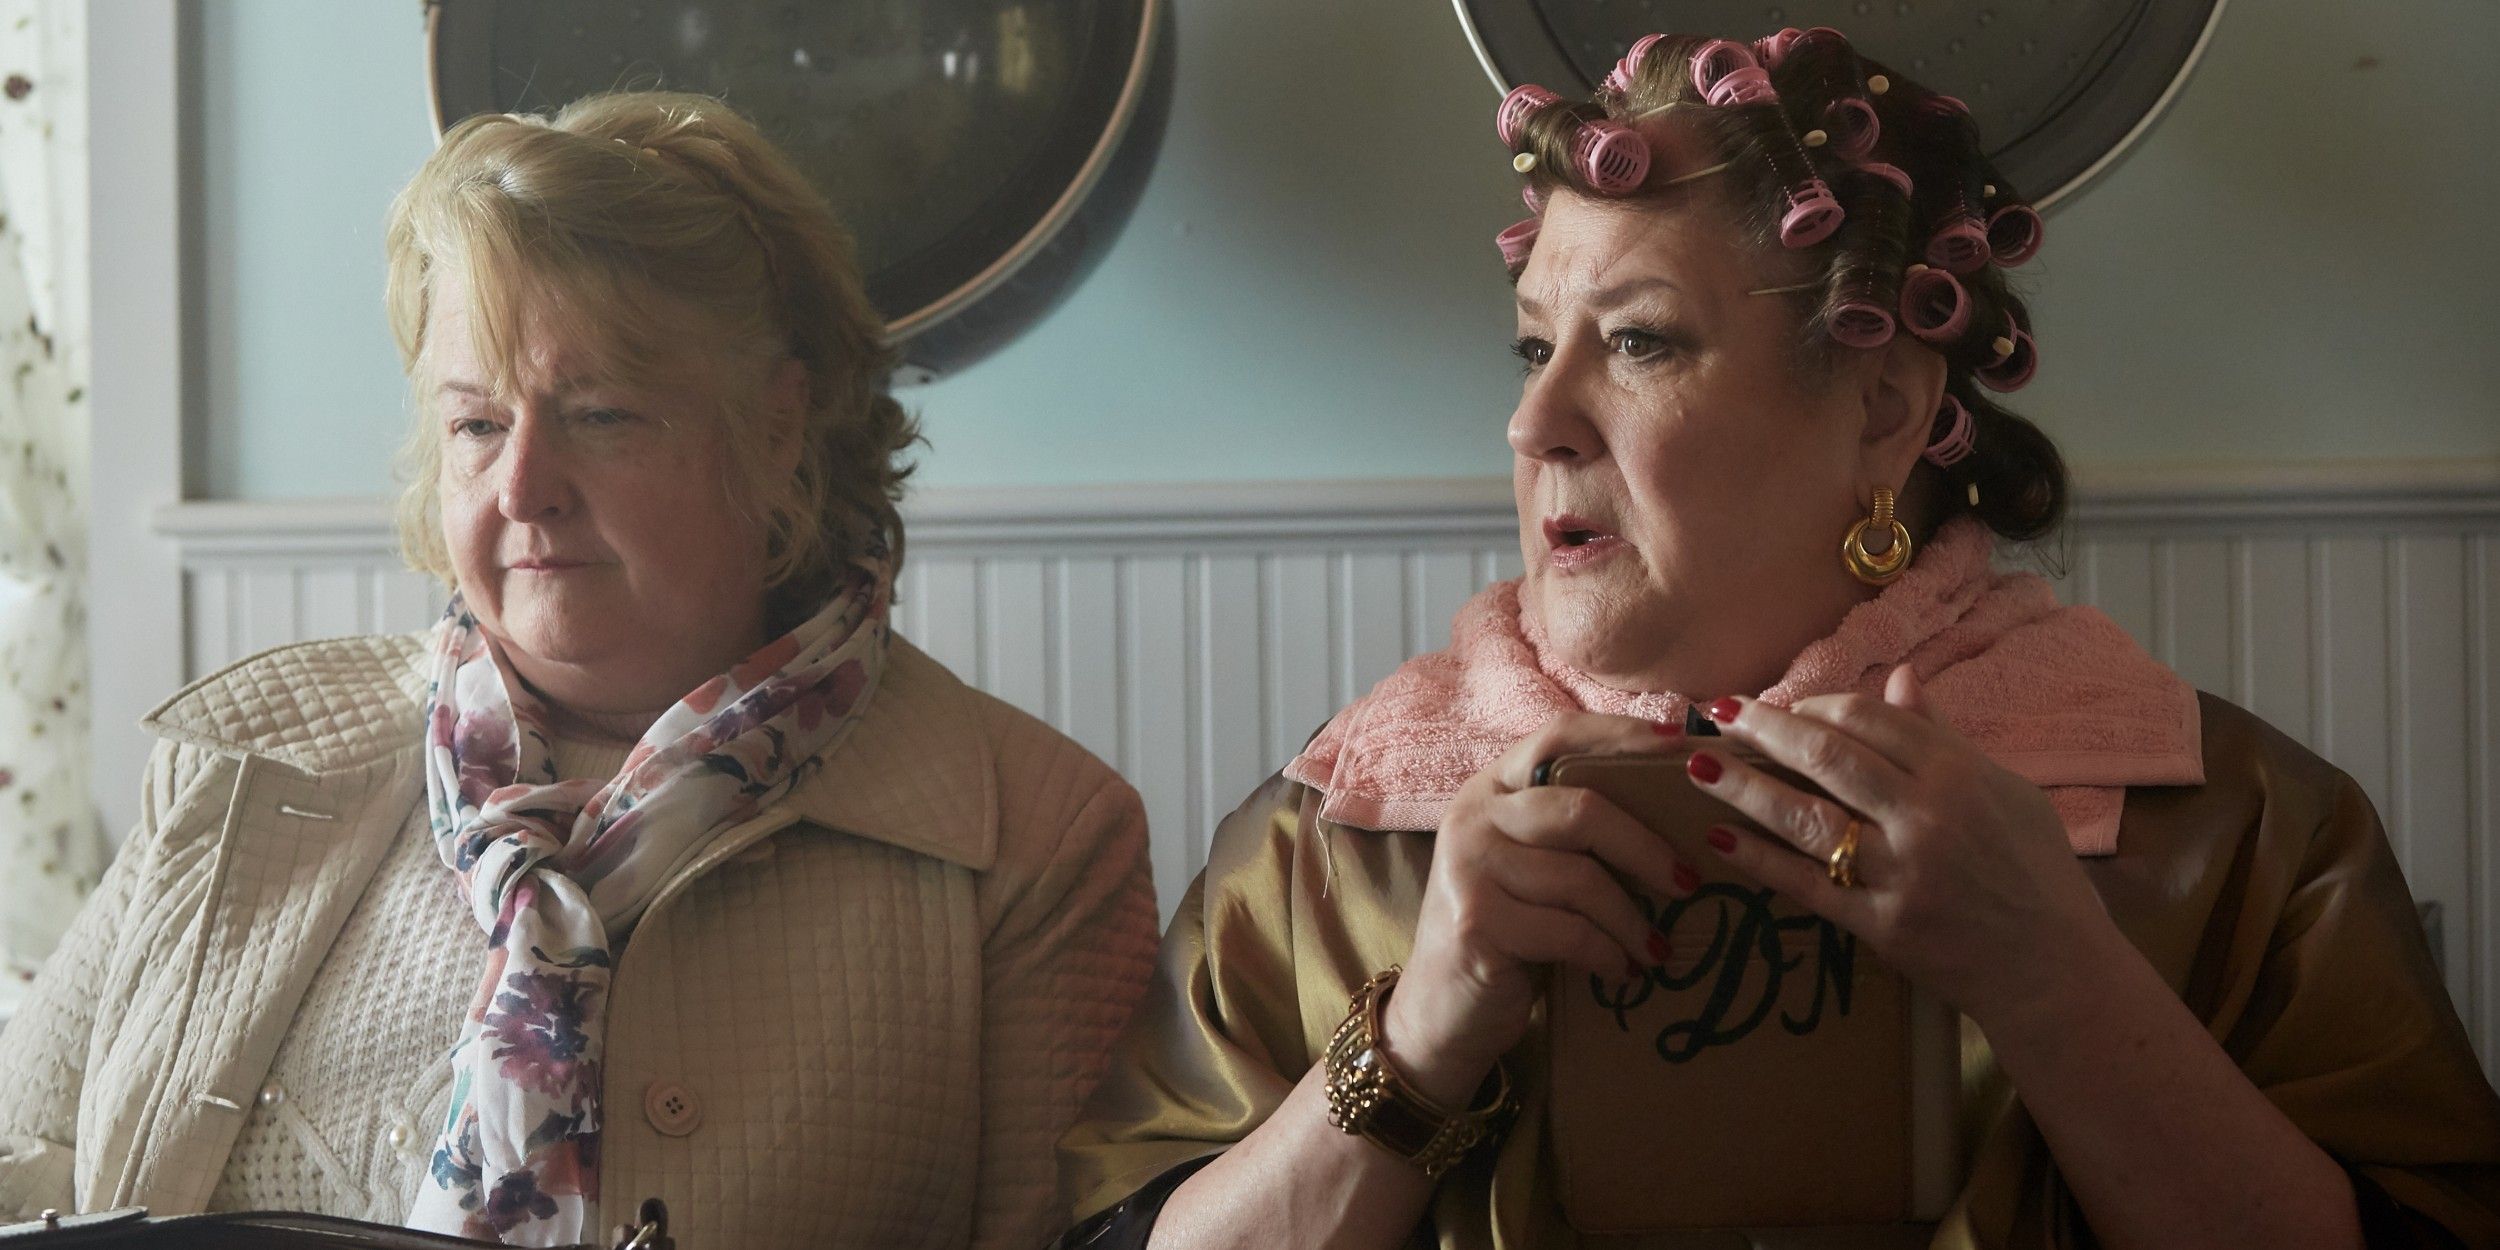 Marceline Hugot and Margo Martindale in Blow the Man Down